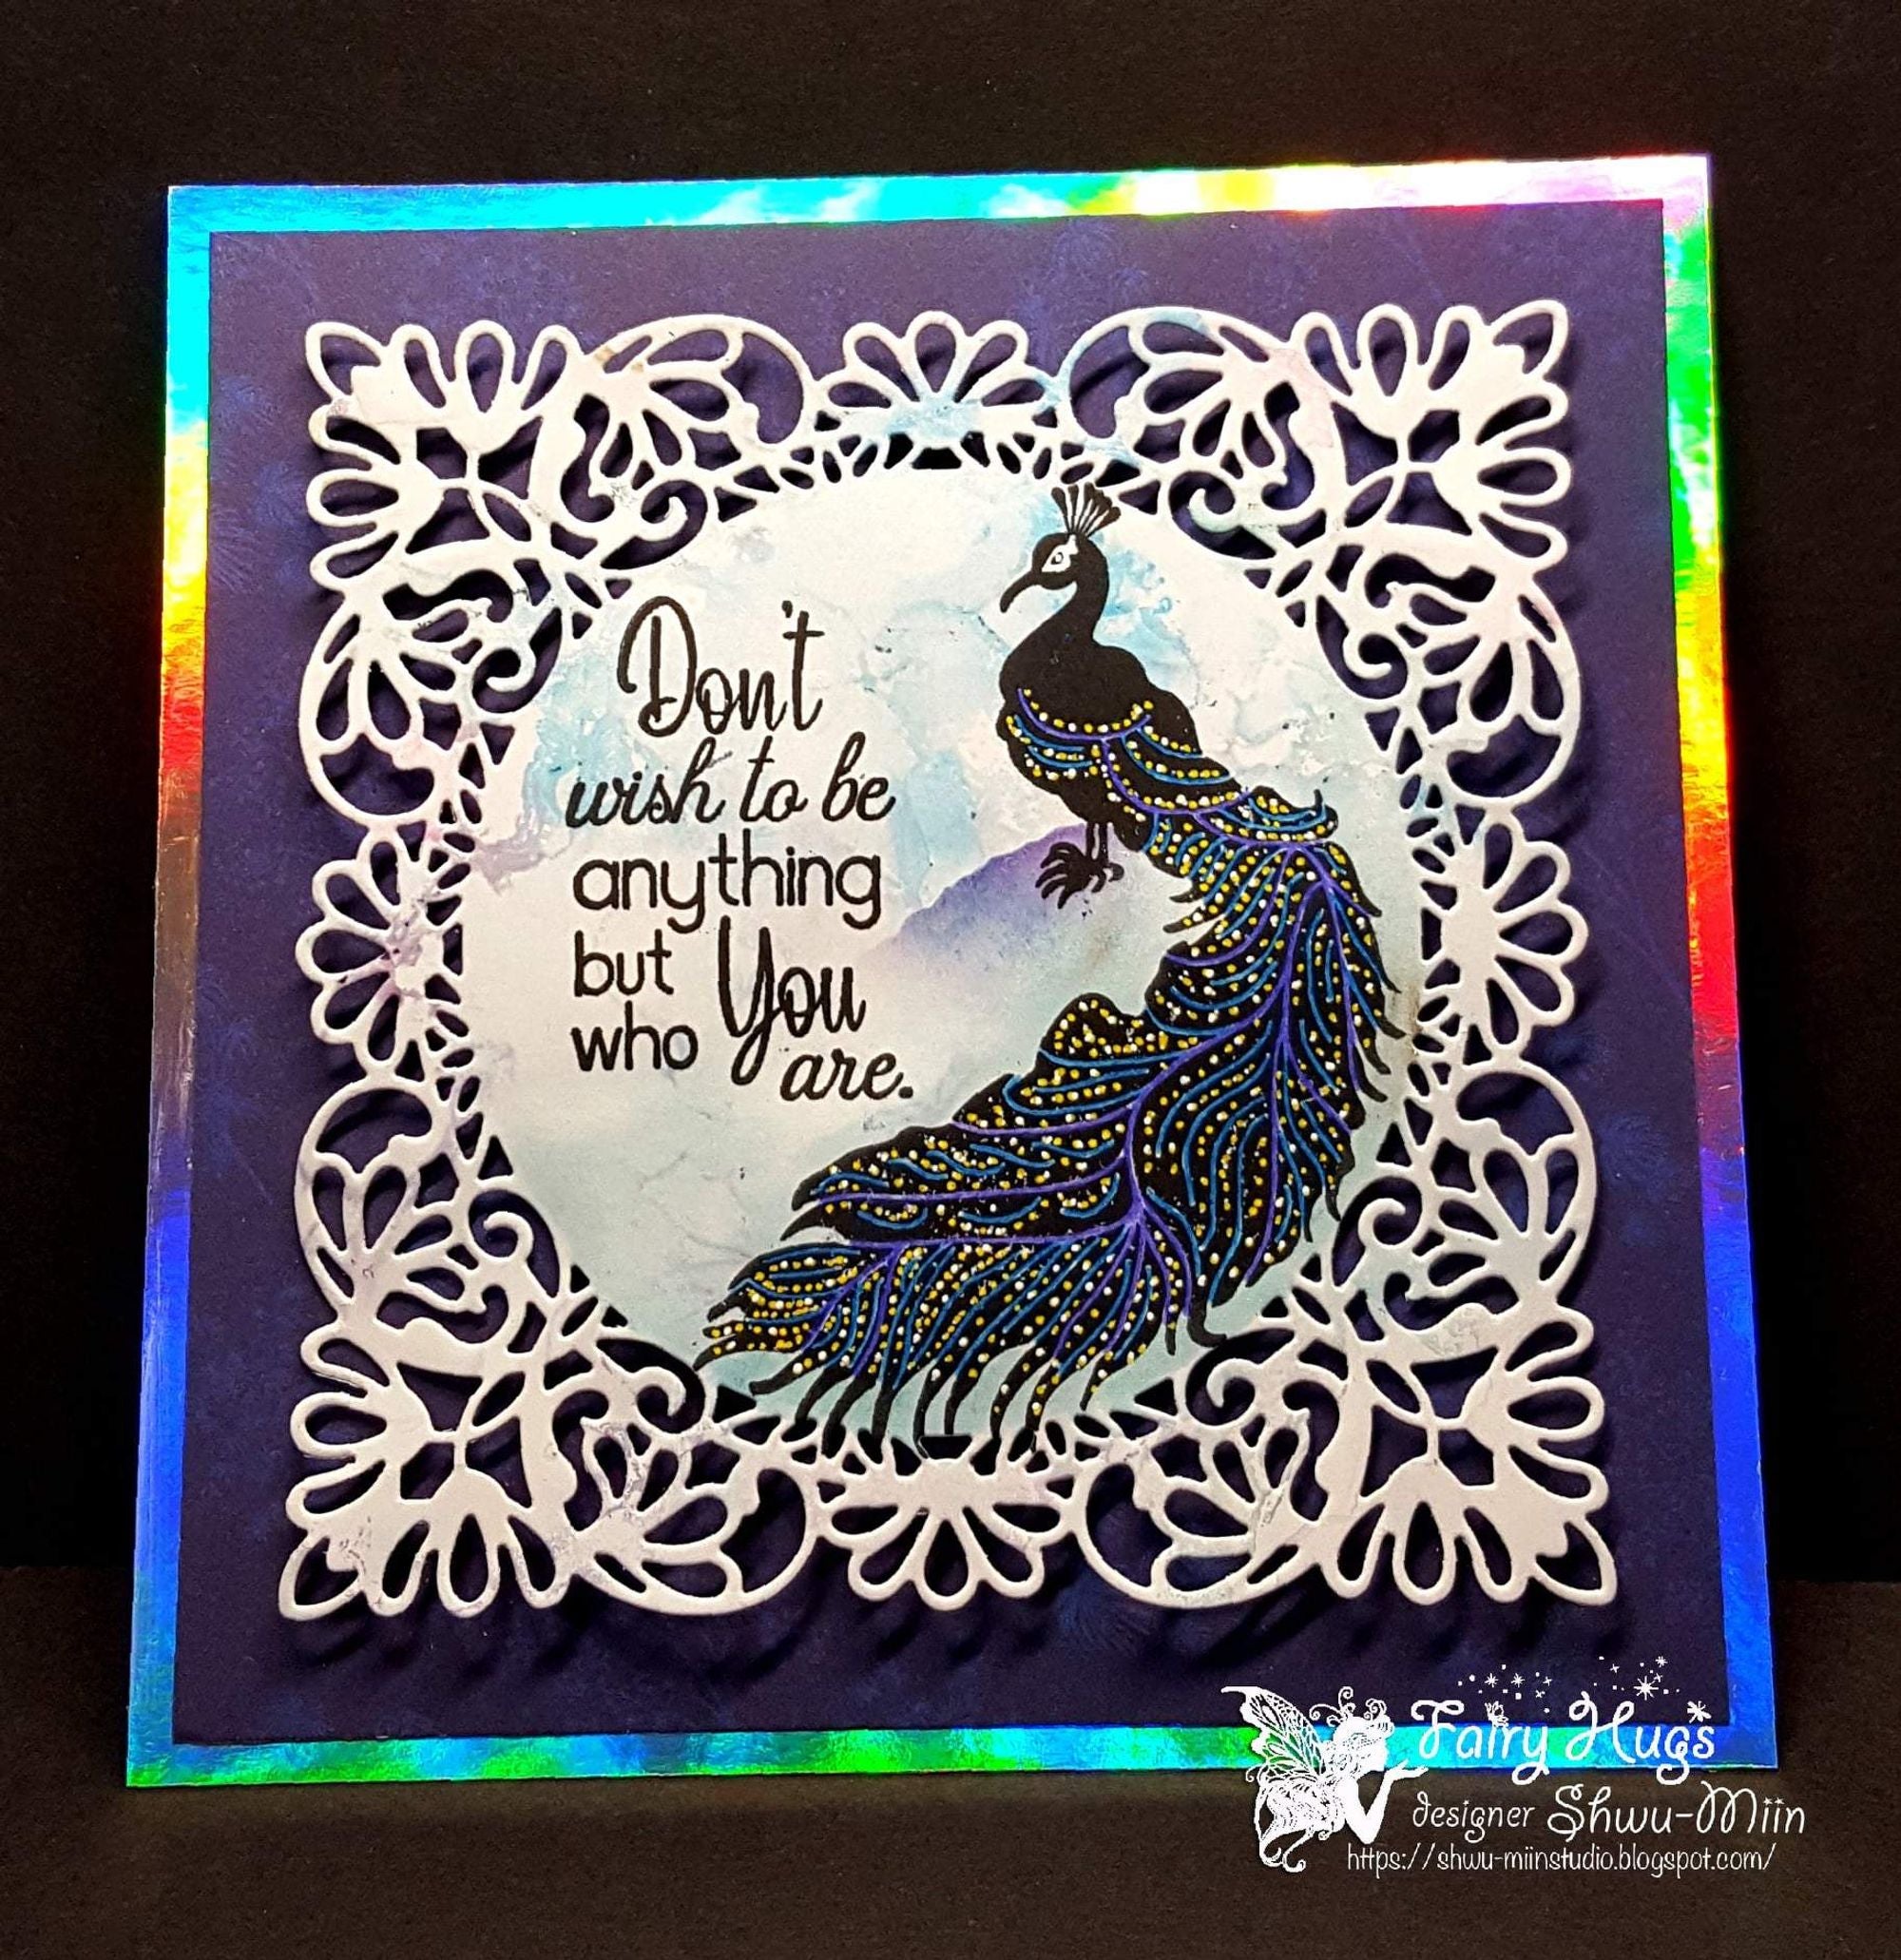 Fairy Hugs Stamps - Peacock